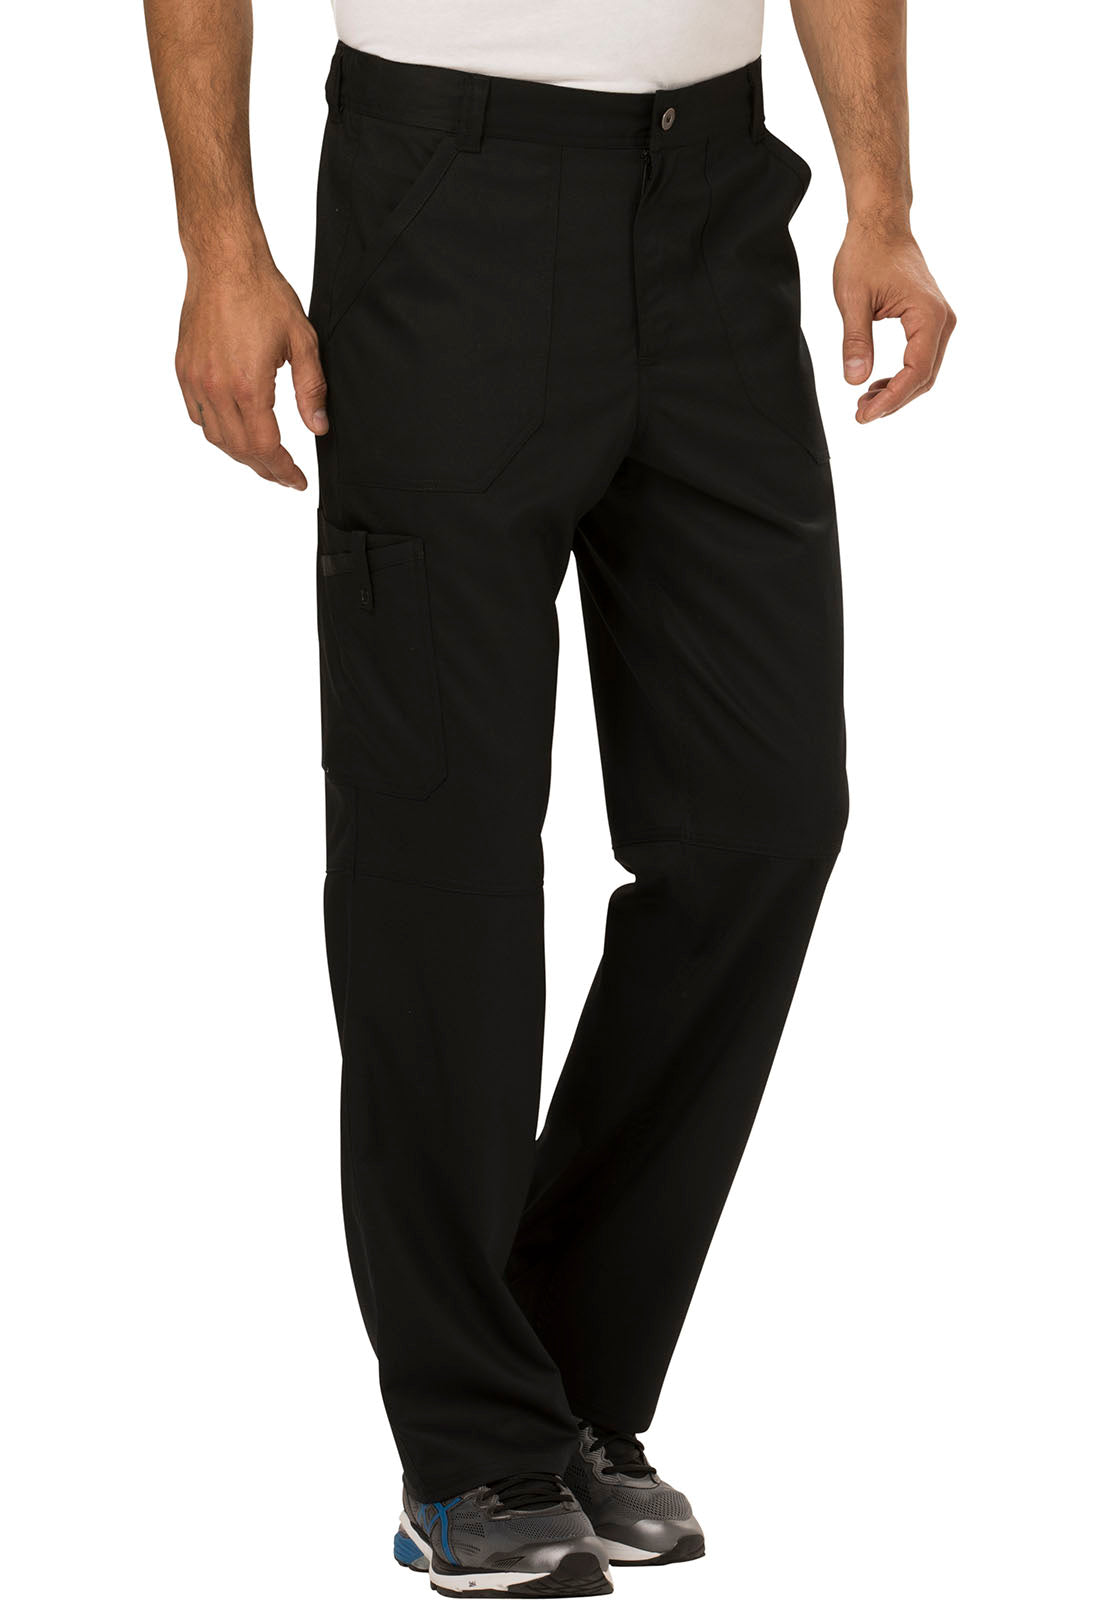 WW140S - Men's Fly Front Pant